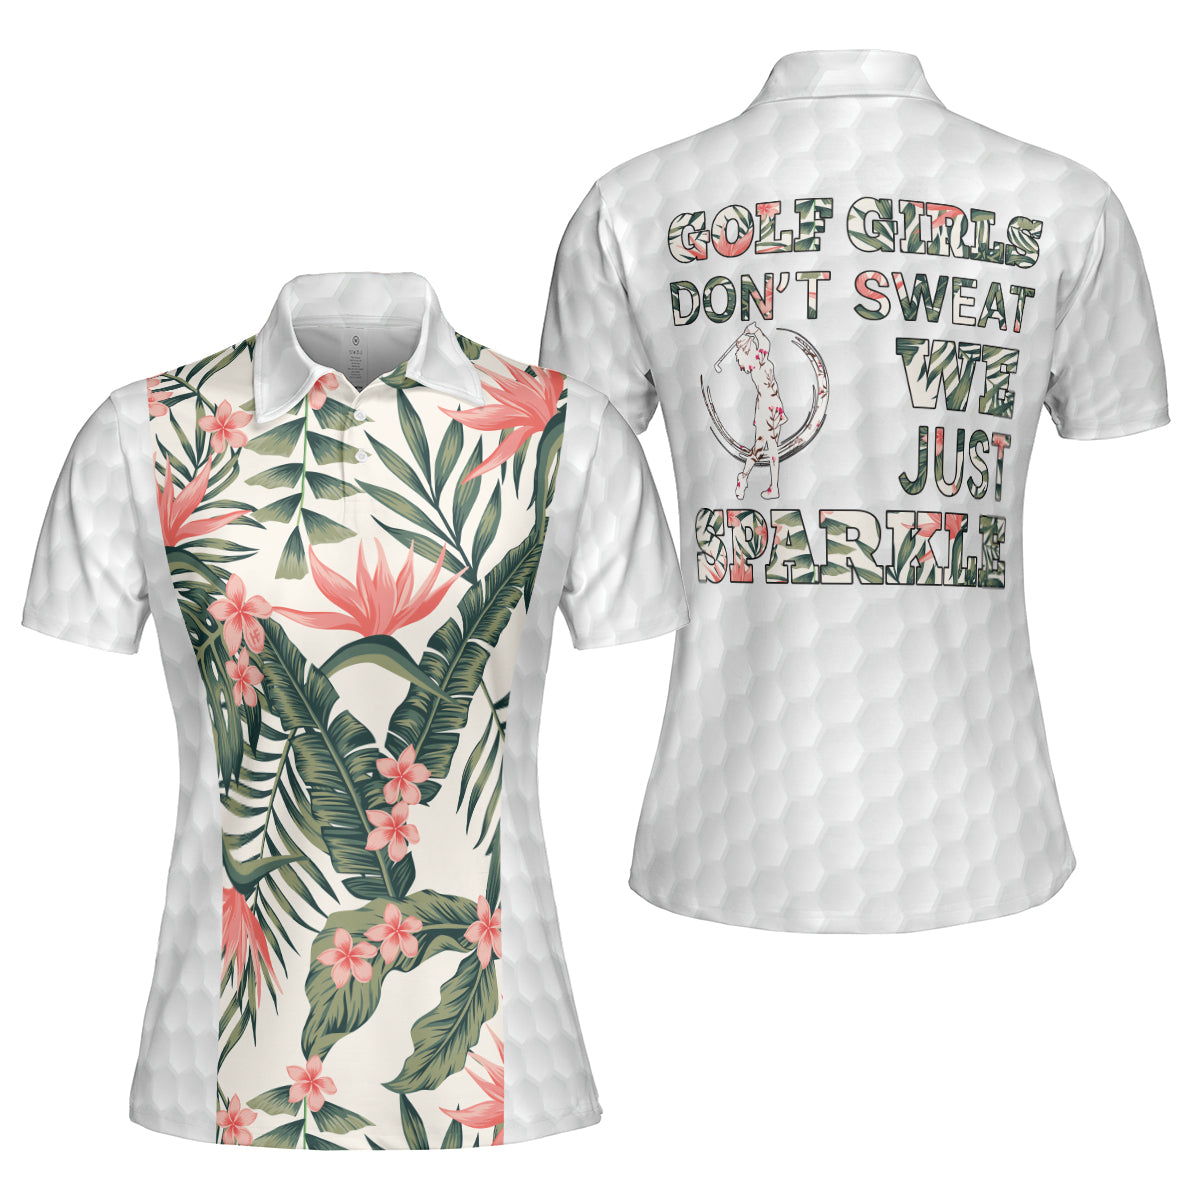 Tropical Pattern Short Sleeve Women Polo Shirt, Golf Girls Don't Sweat We Just Sparkle Shirt For Ladies, Unique Female Golf Gift